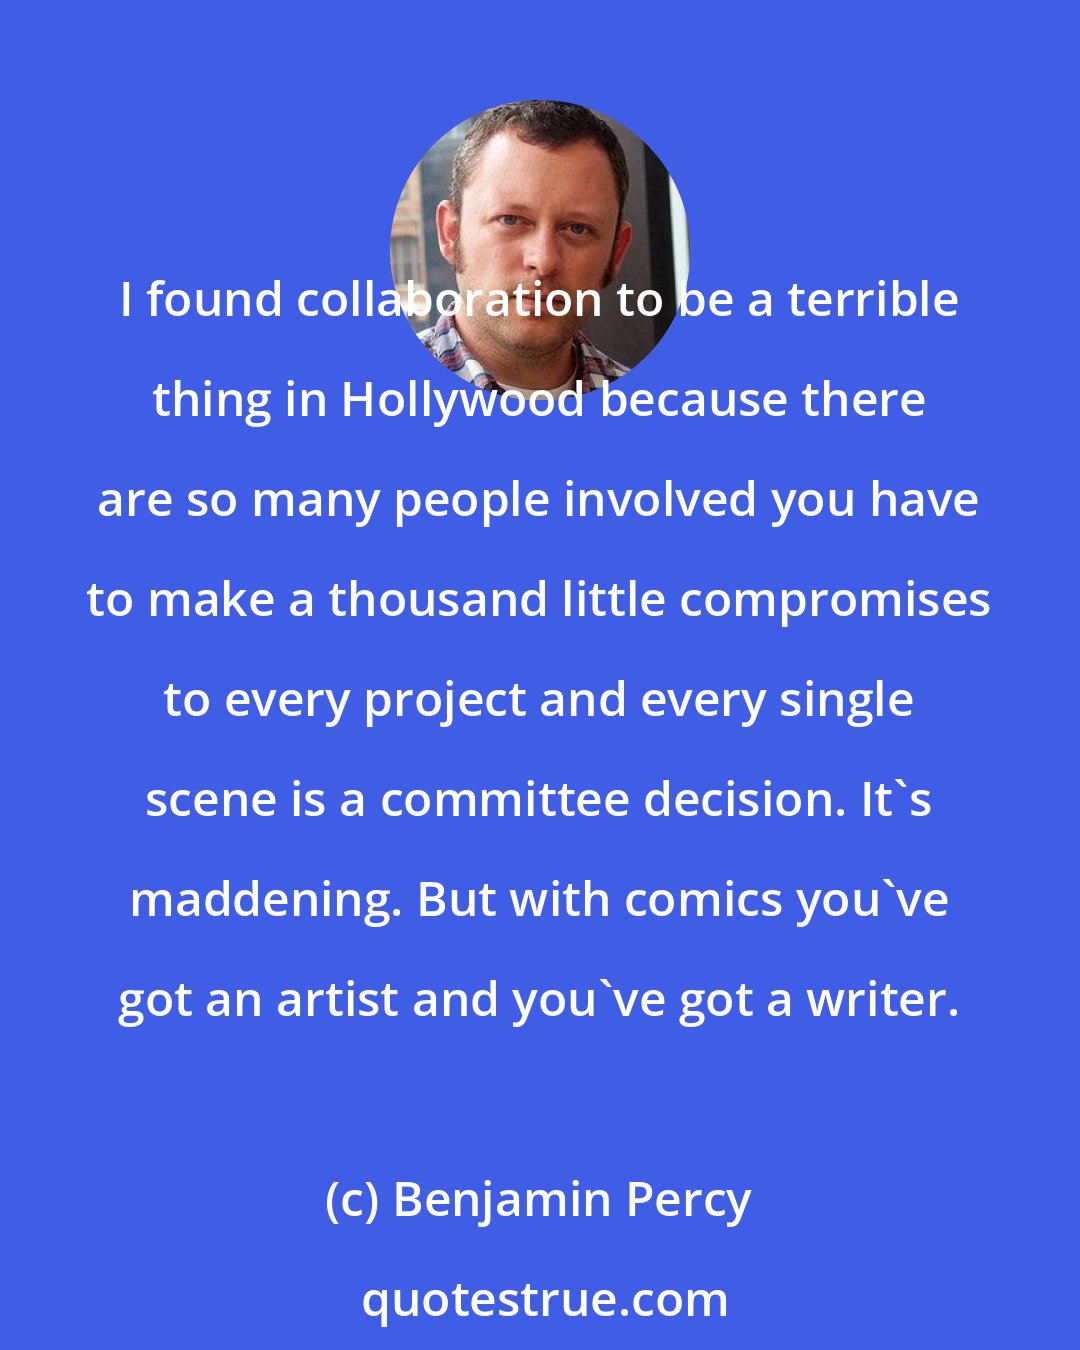 Benjamin Percy: I found collaboration to be a terrible thing in Hollywood because there are so many people involved you have to make a thousand little compromises to every project and every single scene is a committee decision. It's maddening. But with comics you've got an artist and you've got a writer.